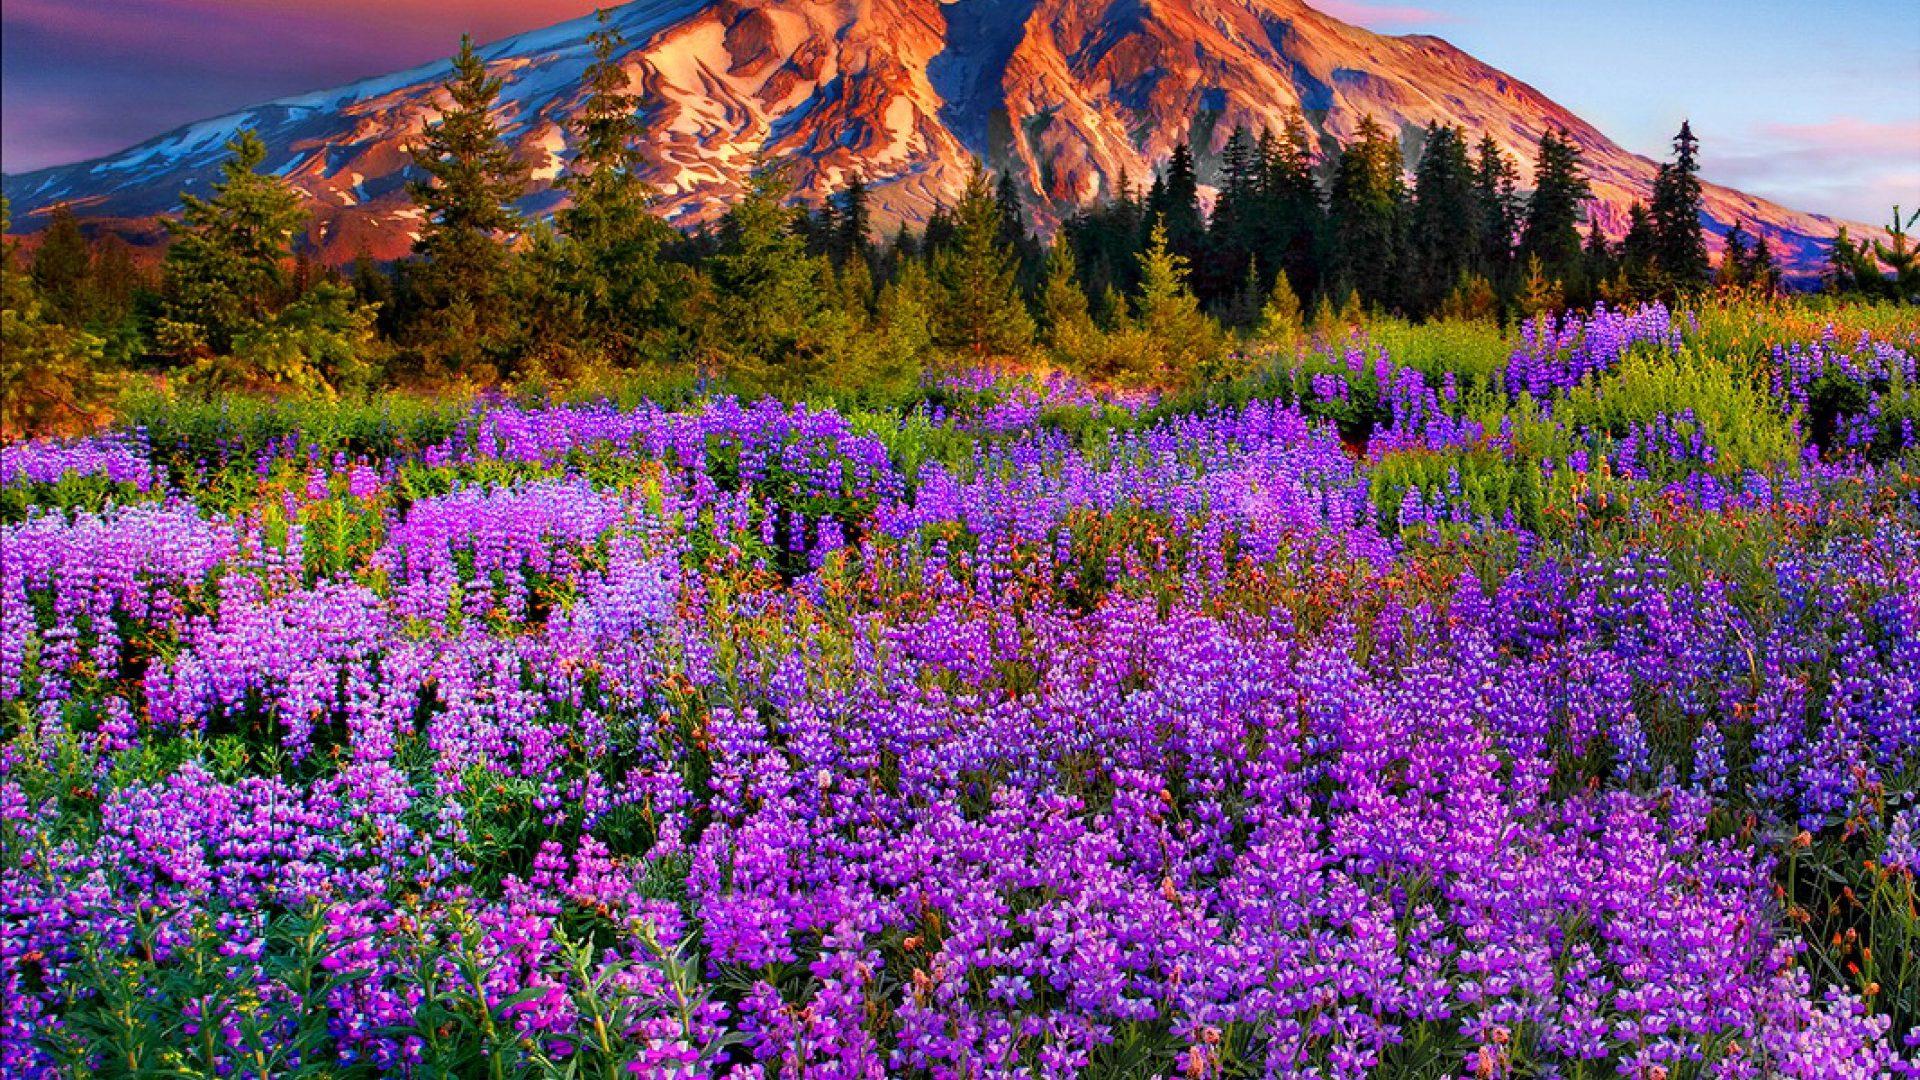 Landscape Purple Mountain Meadow With Flowers, Pine Trees, Mountains